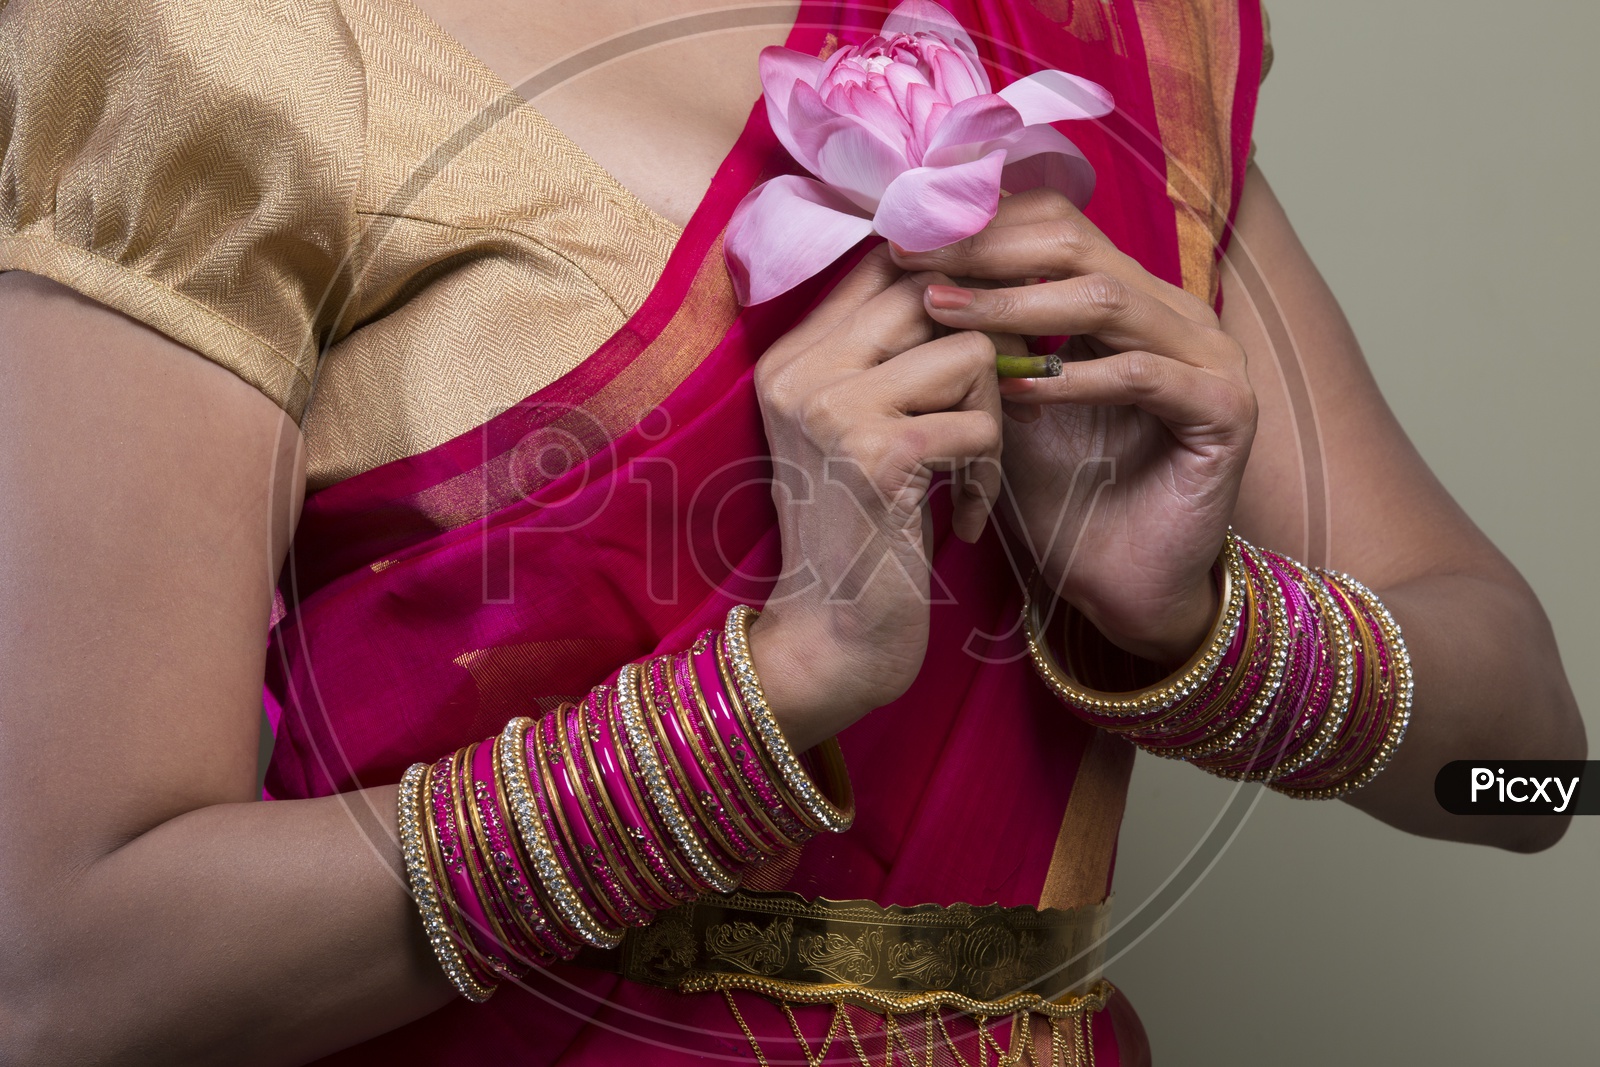 A Beautiful Indian Female Model  in Traditional Attire Wearing a Saree and Jewelry with a Lotus flower in  Hands Closeup Shot  on an Isolated Gery Background